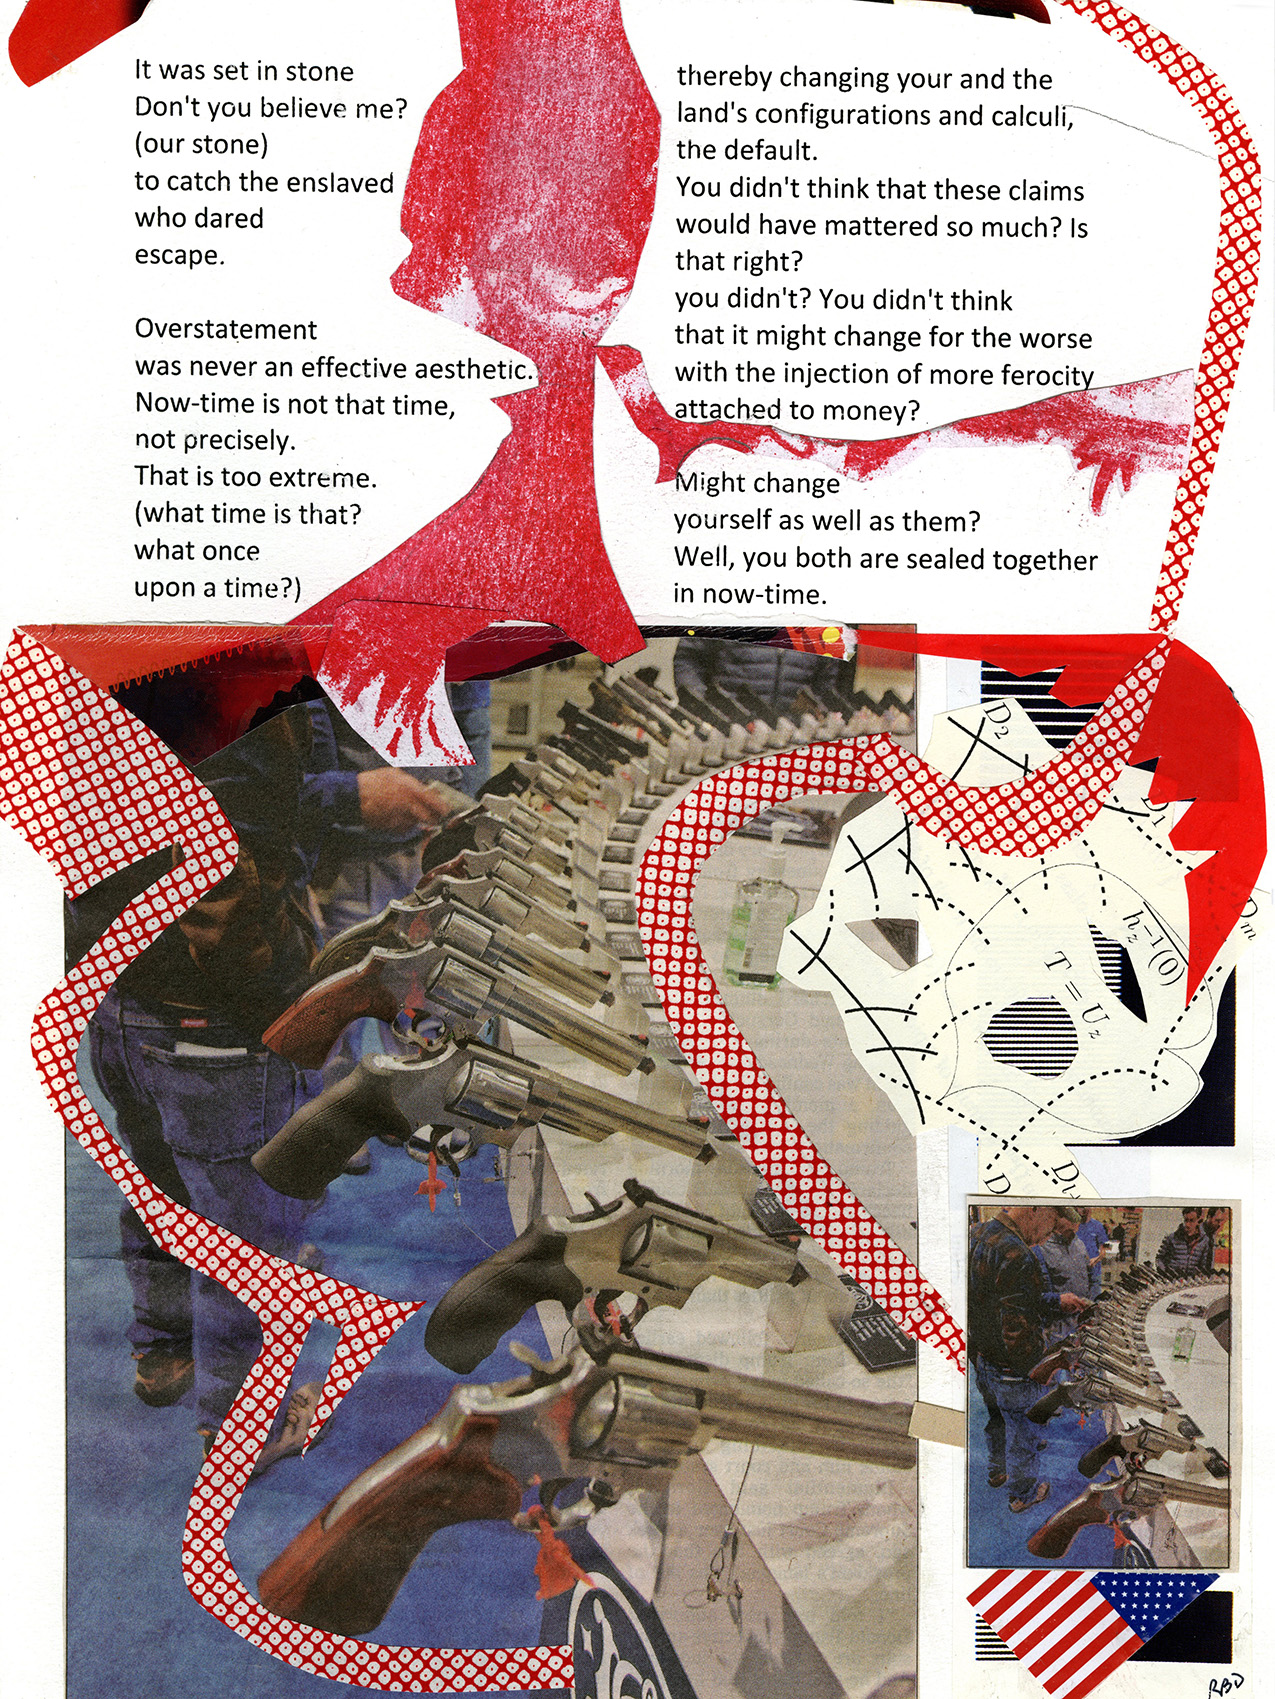 paper collage of a poem, abstract red shapes, mathematical formulas, and a photo of a display of revolvers